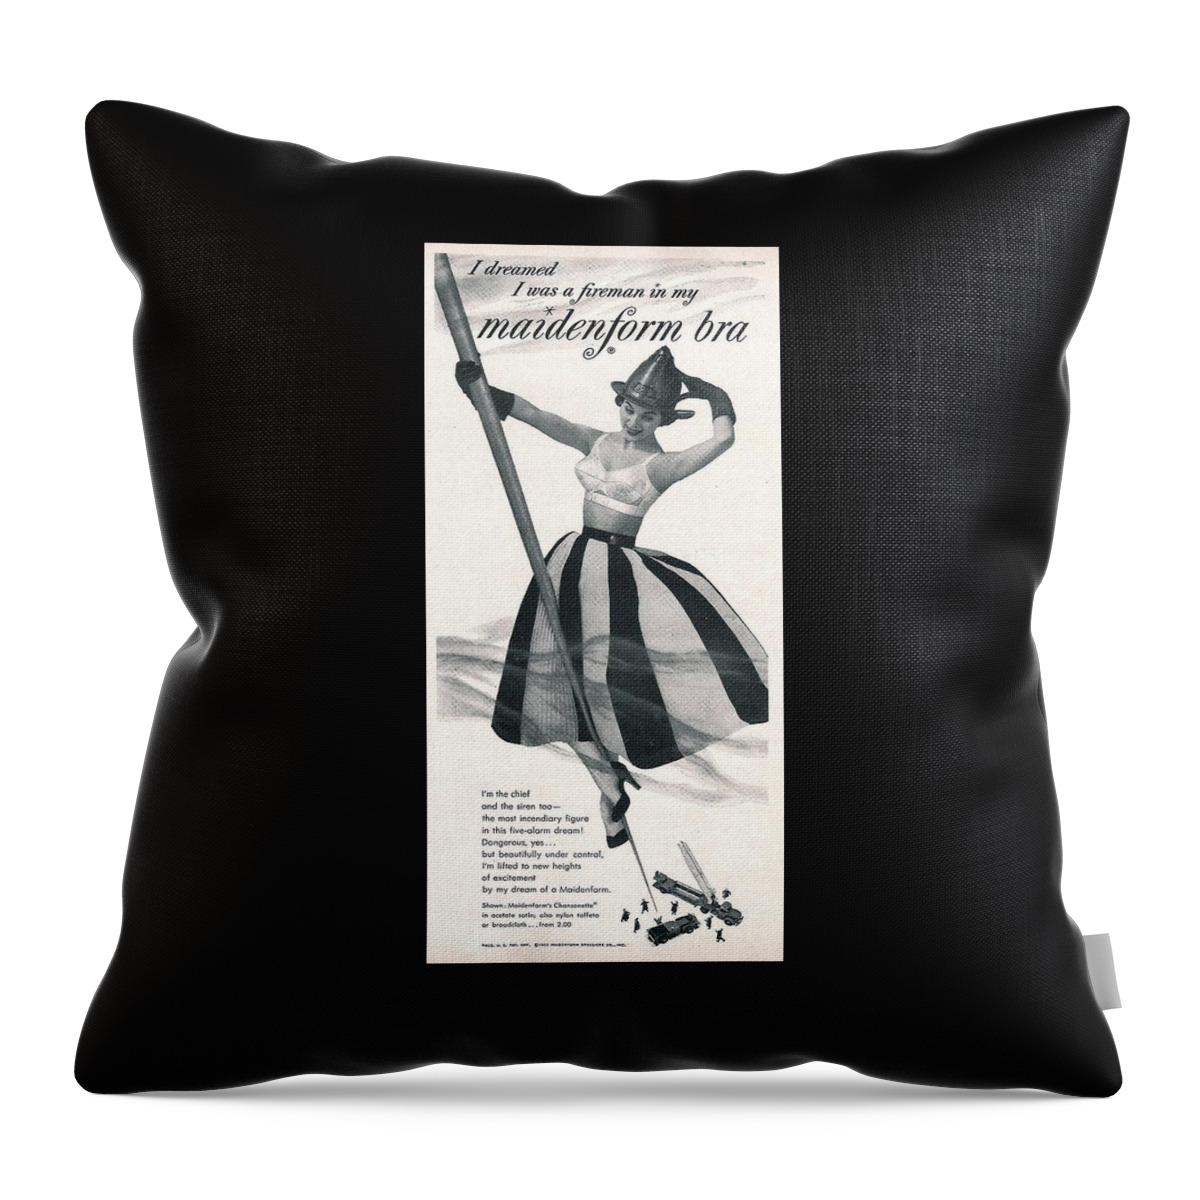 Americana Throw Pillow featuring the digital art I Dreamed I was a Fireman in my Maidenform Bra by Kim Kent